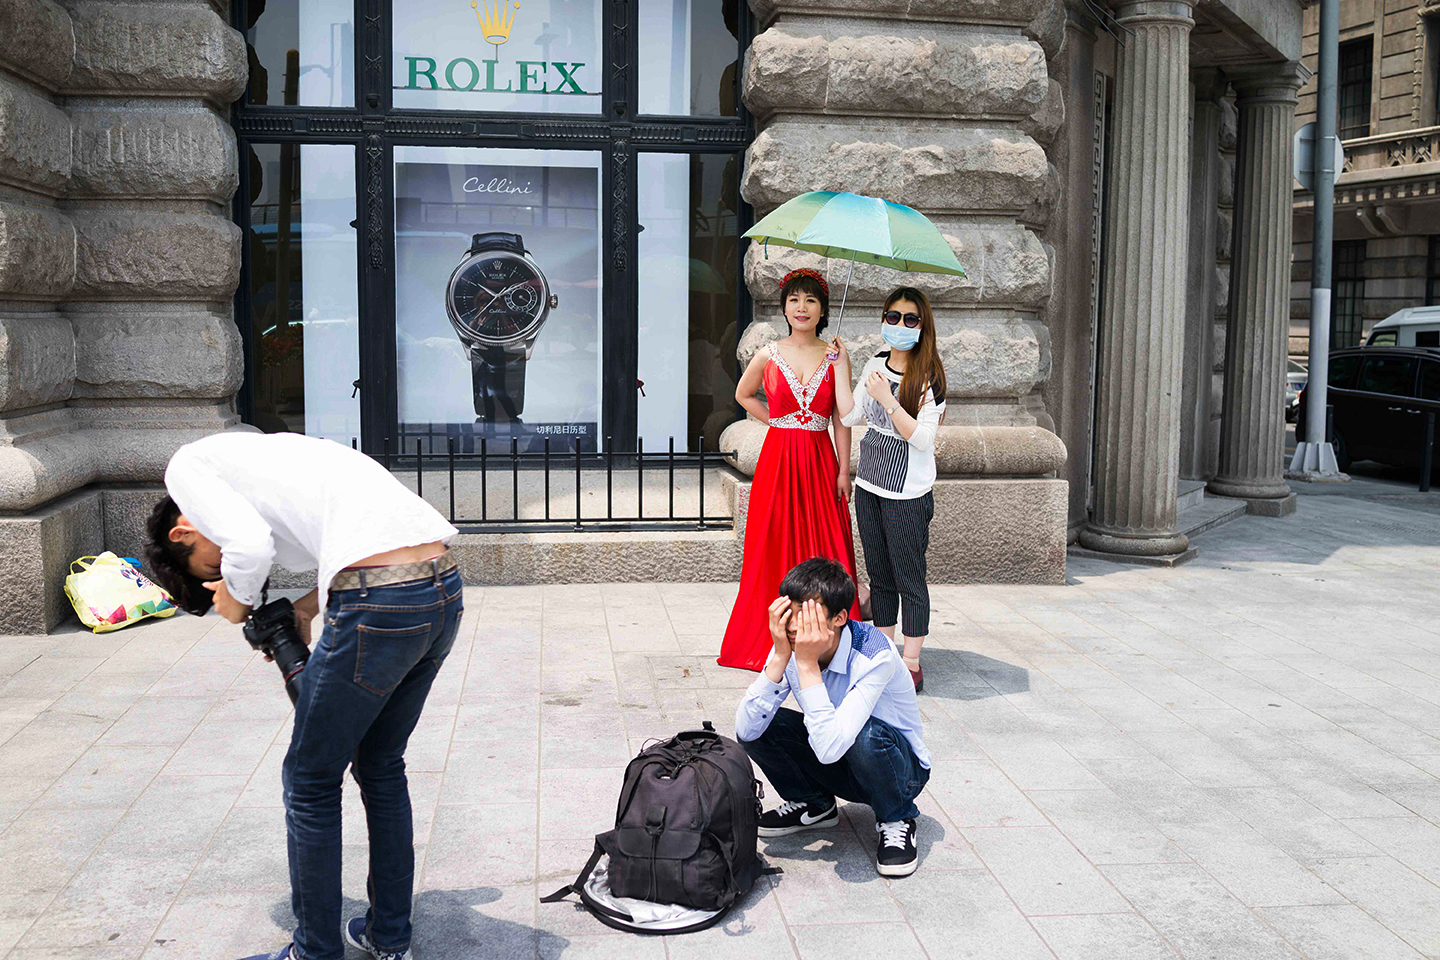 On the streets of the Bund in Shanghai, sandstone, European-style buildings are populated with wedding photo shoots, seen here in May 2013.